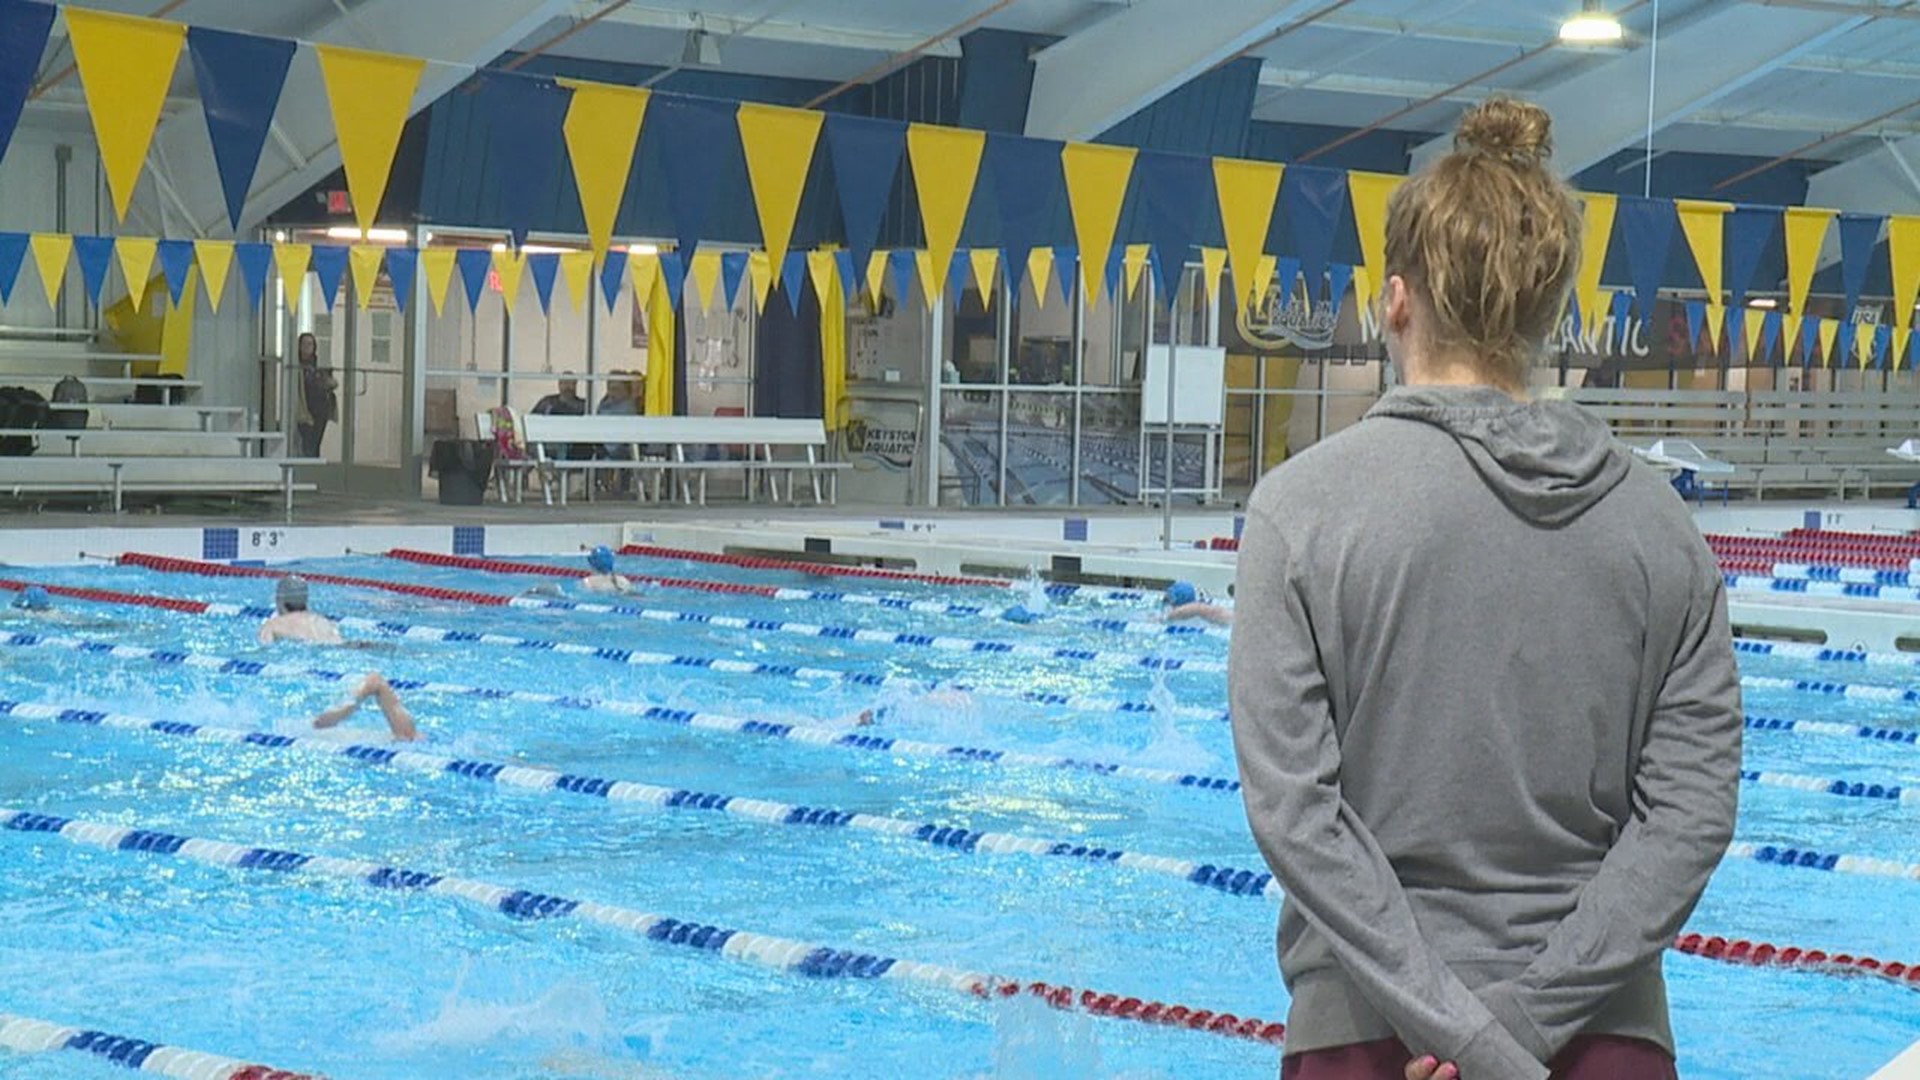 Keystone Aquatics hosts its first-ever college recruiting event to connect local swimmers to some 30 colleges from around the area and beyond.